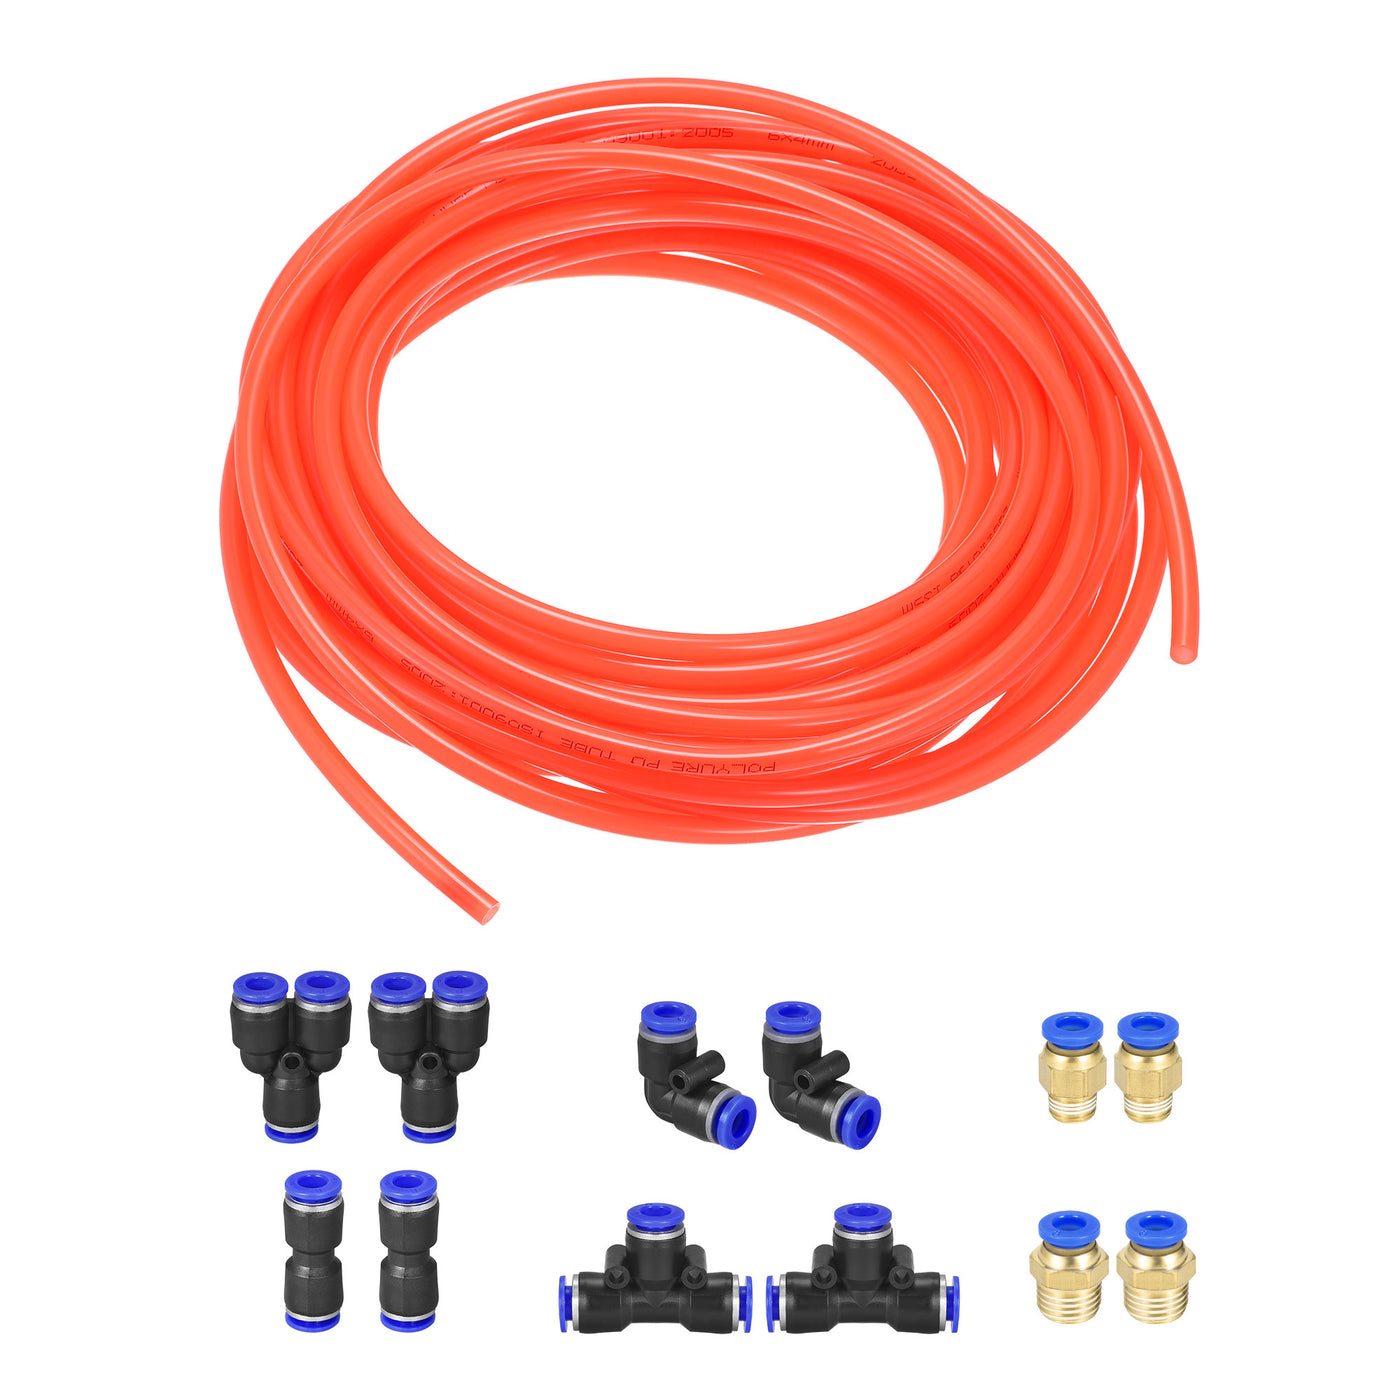 uxcell Uxcell Pneumatic Air Hose Tubing PU Air Compressor Tube 4mm/0.16''ID x 6mm/0.23''OD x 10m/32.8Ft Polyurethane Pipe Bright Orange with Connect Fitting Kit